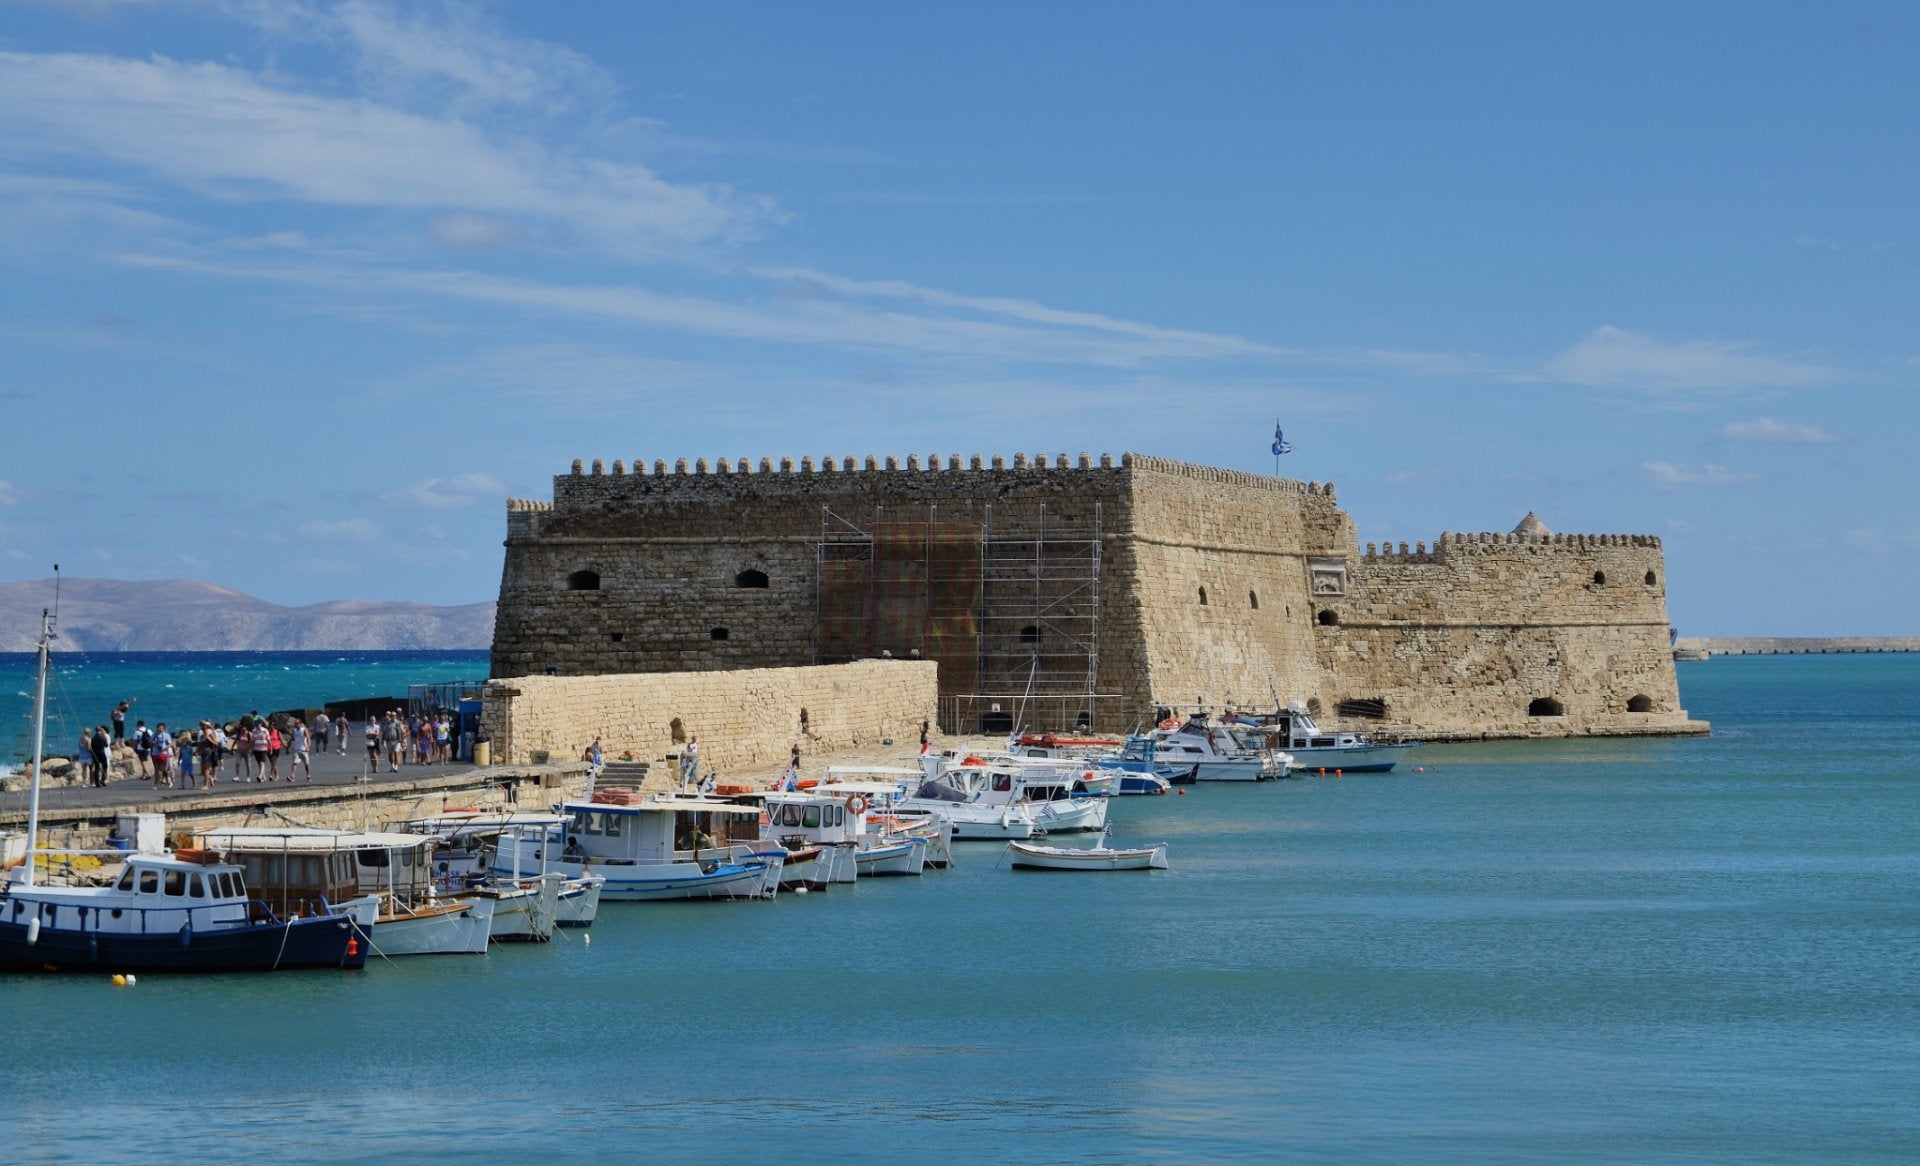 HRADF launches tender process to sell majority stake in Heraklion port